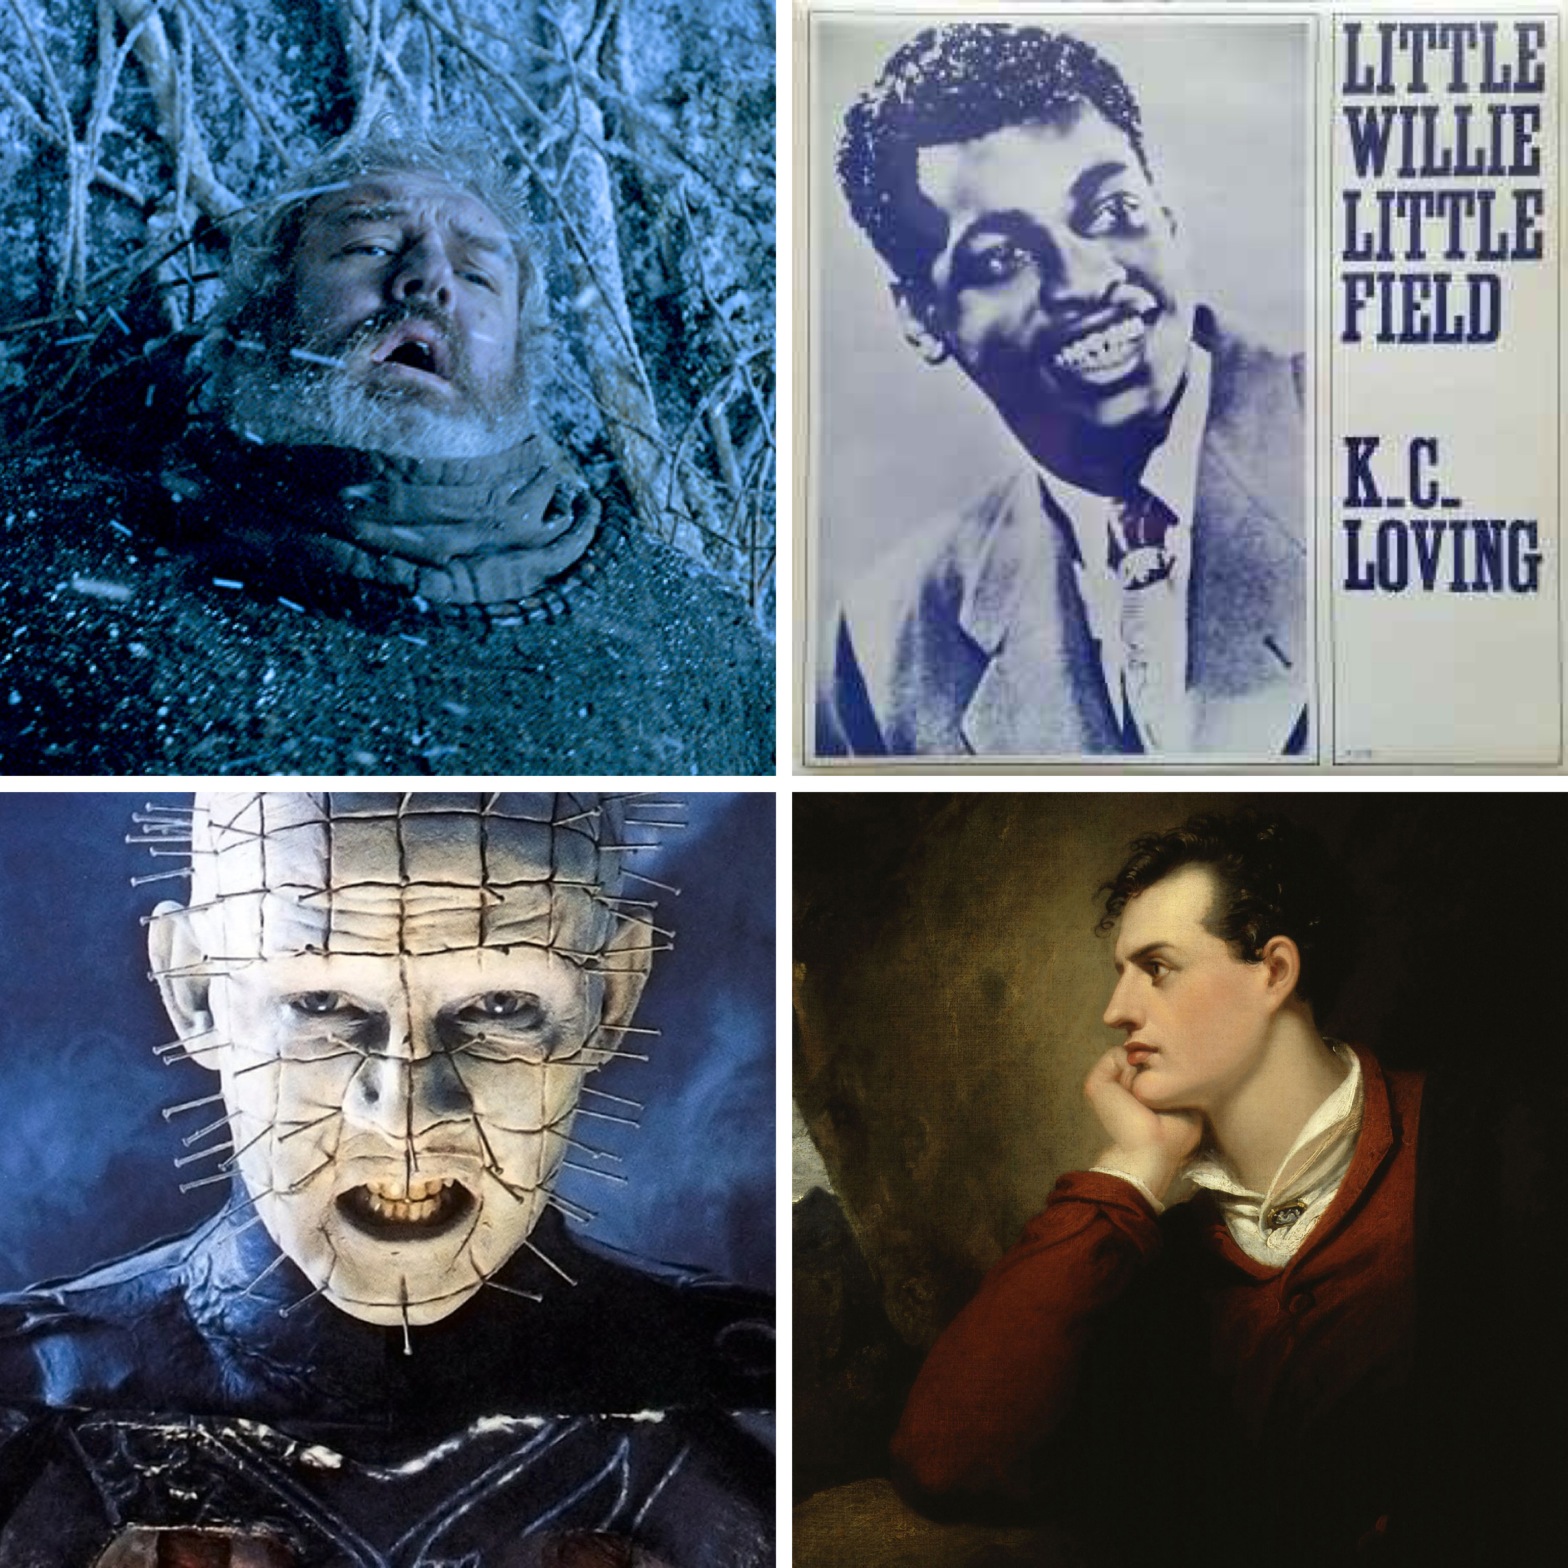 Hodor from Game of Thrones, Little Willie Littlefield, Hellraiser, and Lord Byron.